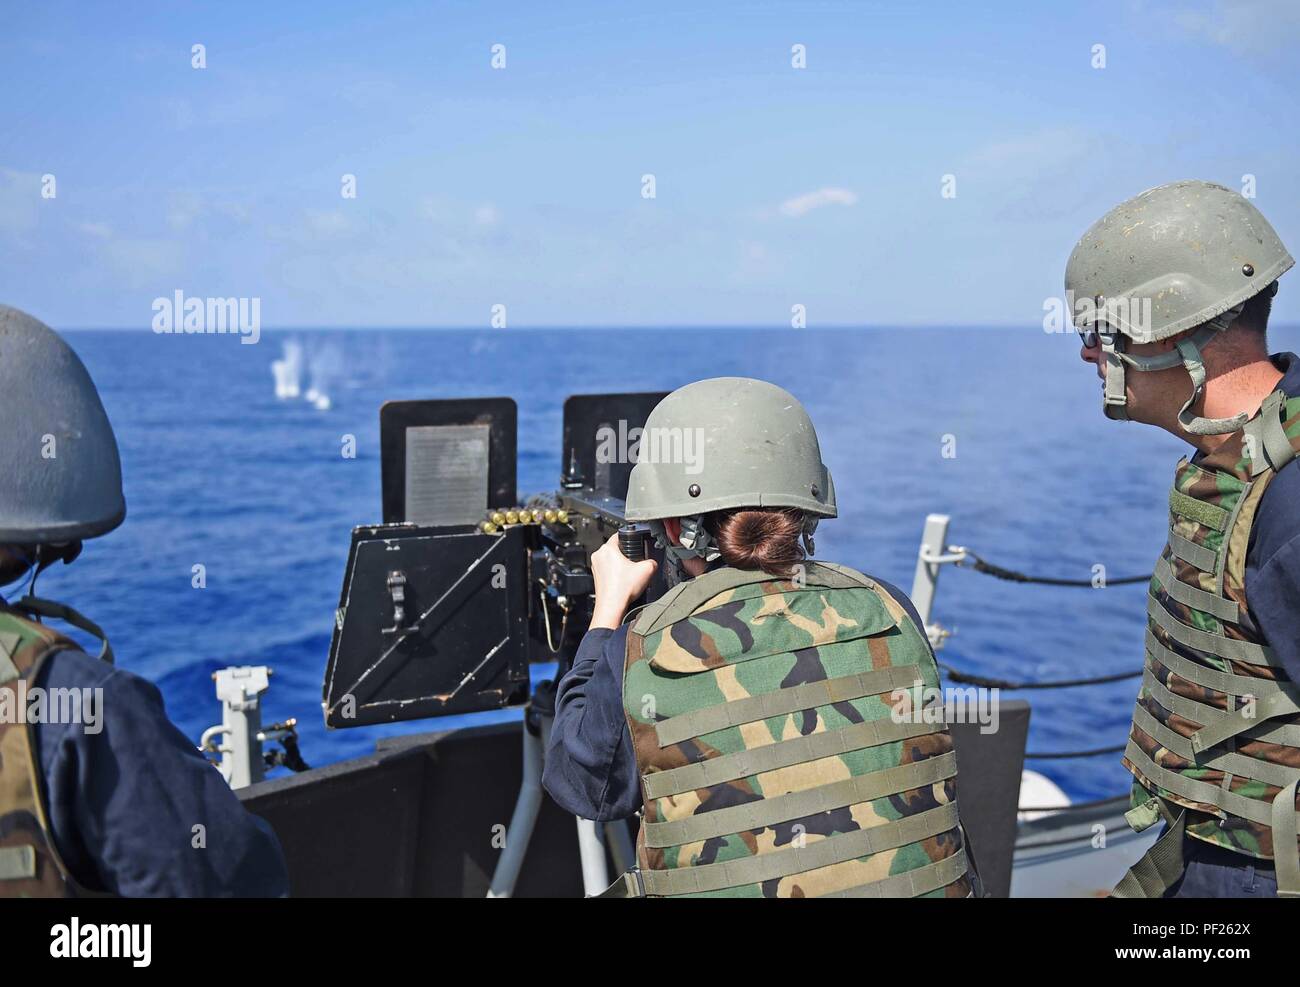 160228-N-KM939-188 PHILIPPINE SEA (Feb. 28, 2016) - Gunner’s Mate Seaman Ashley Koblitz, from Jacksonville, fires a .50-caliber machine gun during a small craft action team exercise aboard the guided-missile destroyer USS Stockdale (DDG 106). Providing a ready force supporting security and stability in the Indo-Asia-Pacific, Stockdale is operating as part of the John C. Stennis Strike Group and Great Green Fleet on a regularly scheduled 7th Fleet deployment. (U.S. Navy photo by Mass Communication Specialist 3rd Class David A. Cox/Released) Stock Photo